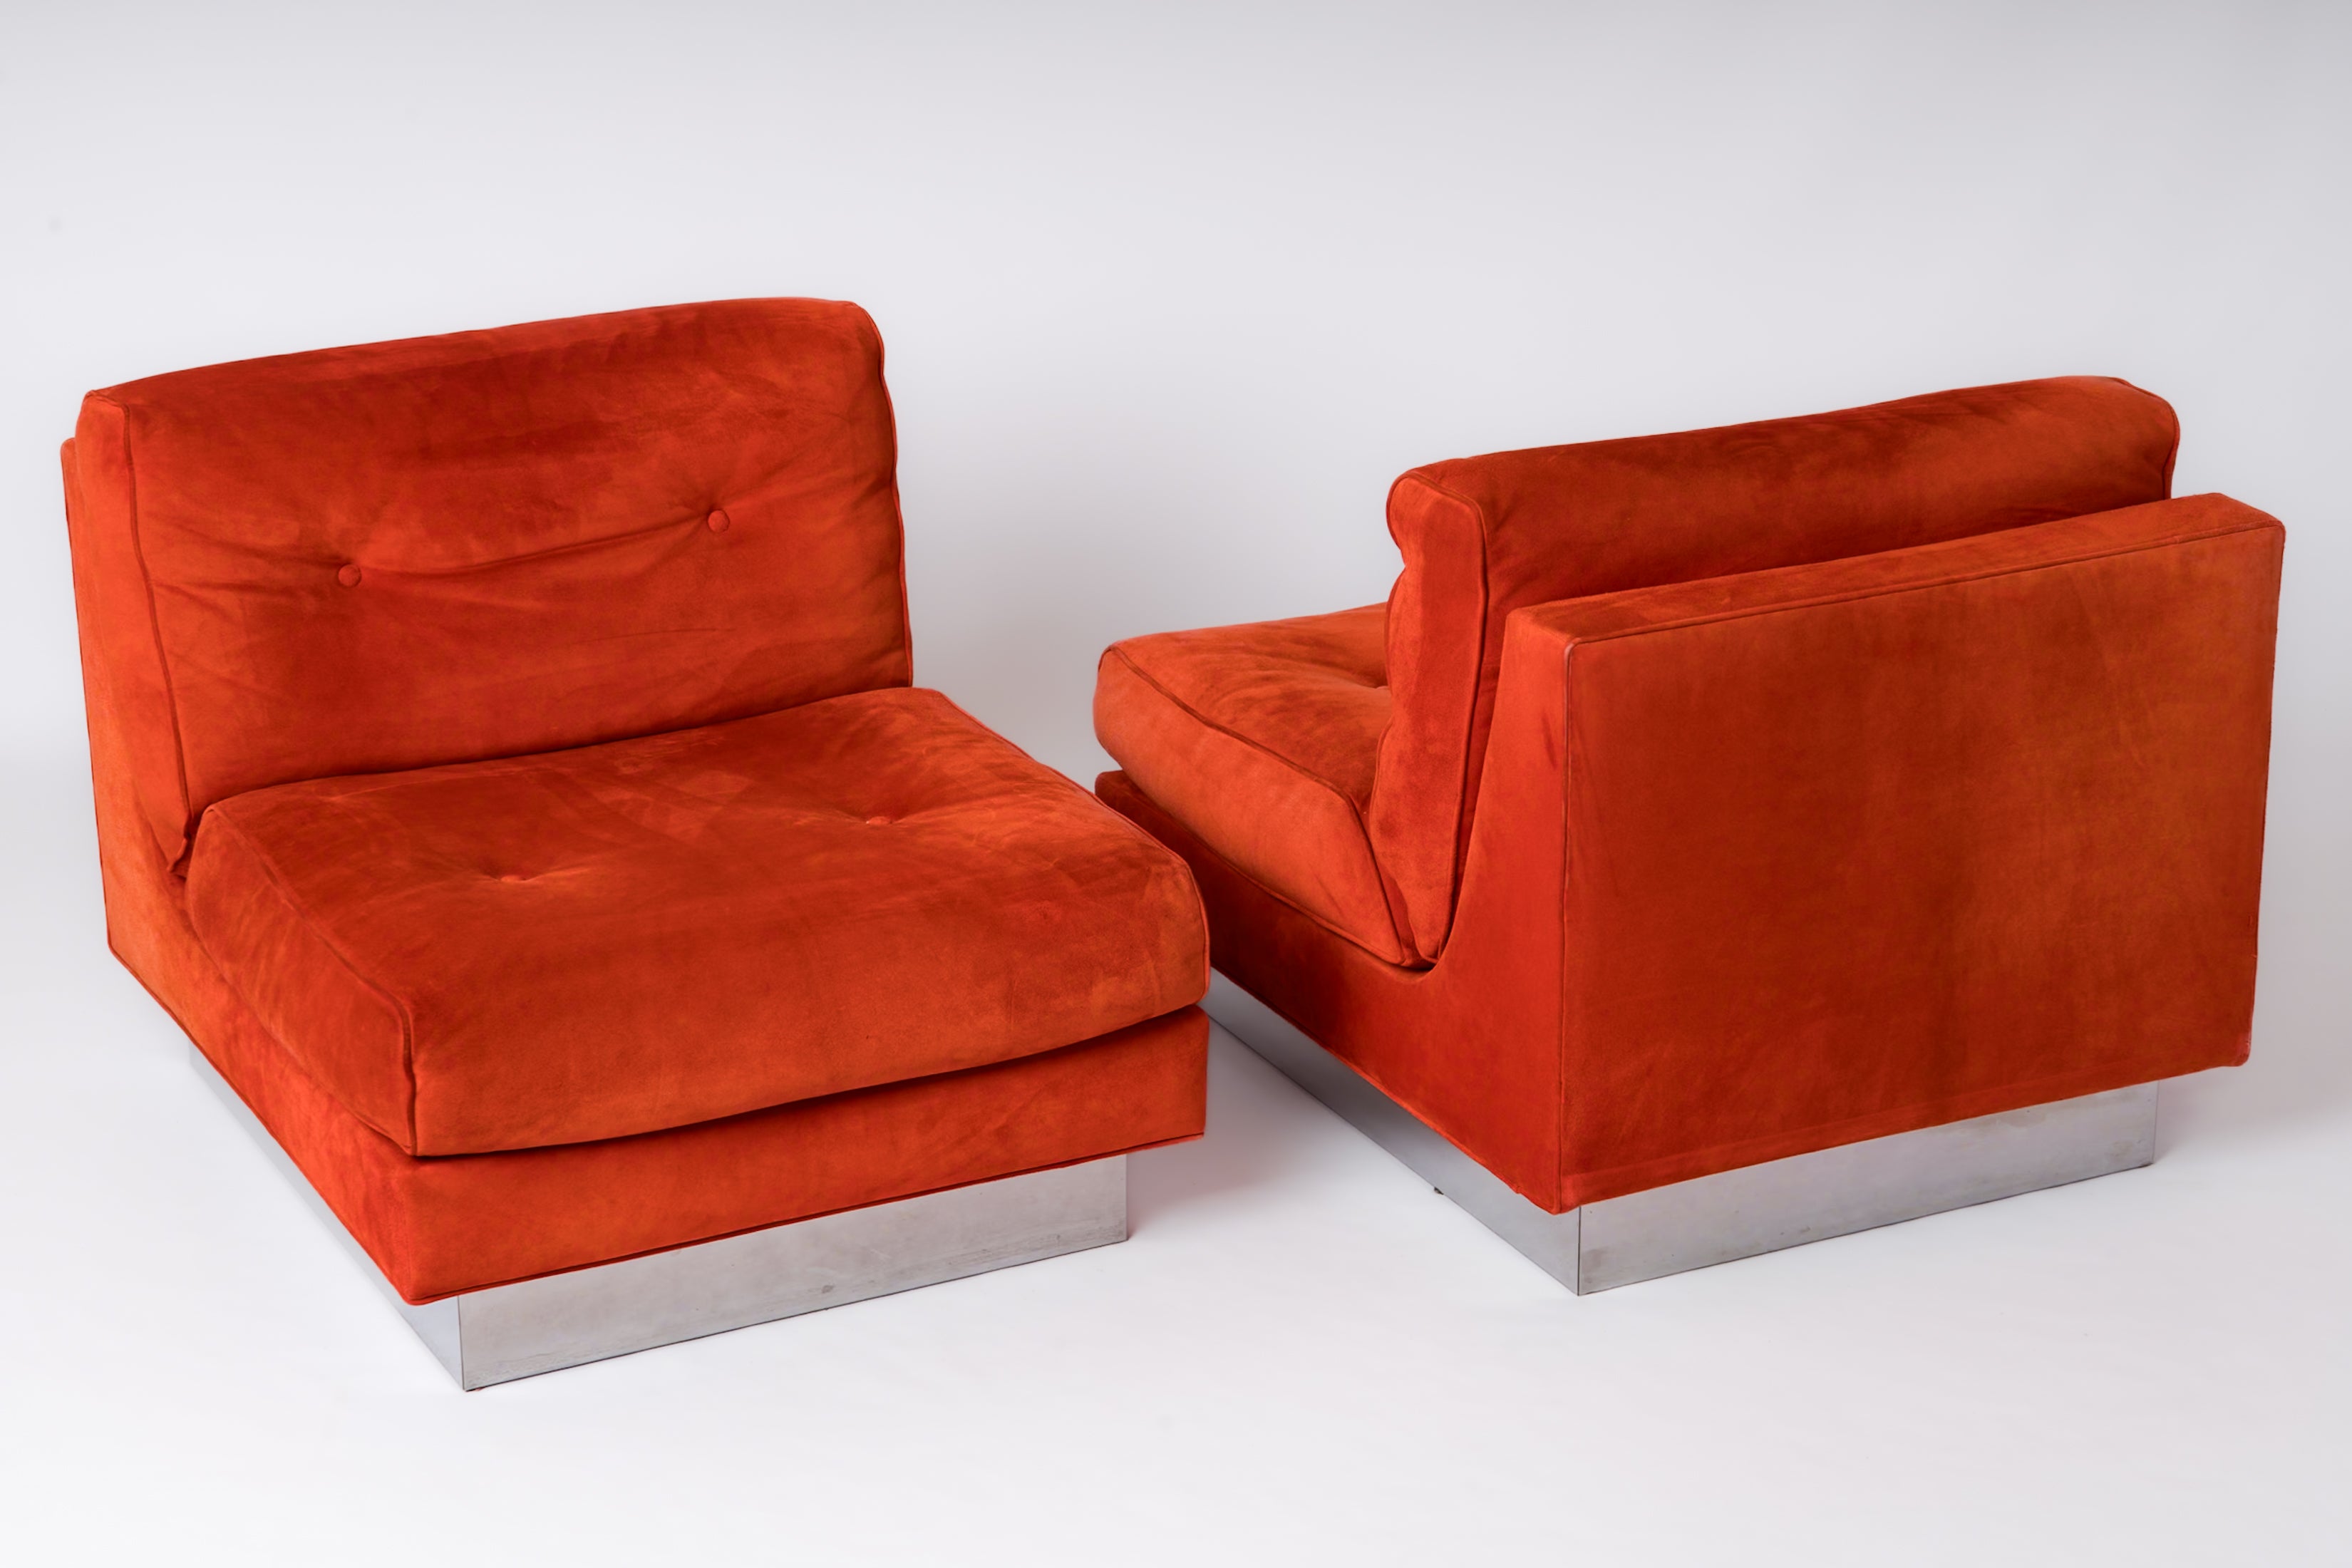 Two Blood Orange Suede "Californian" Lounge Chairs by J. Charpentier - France